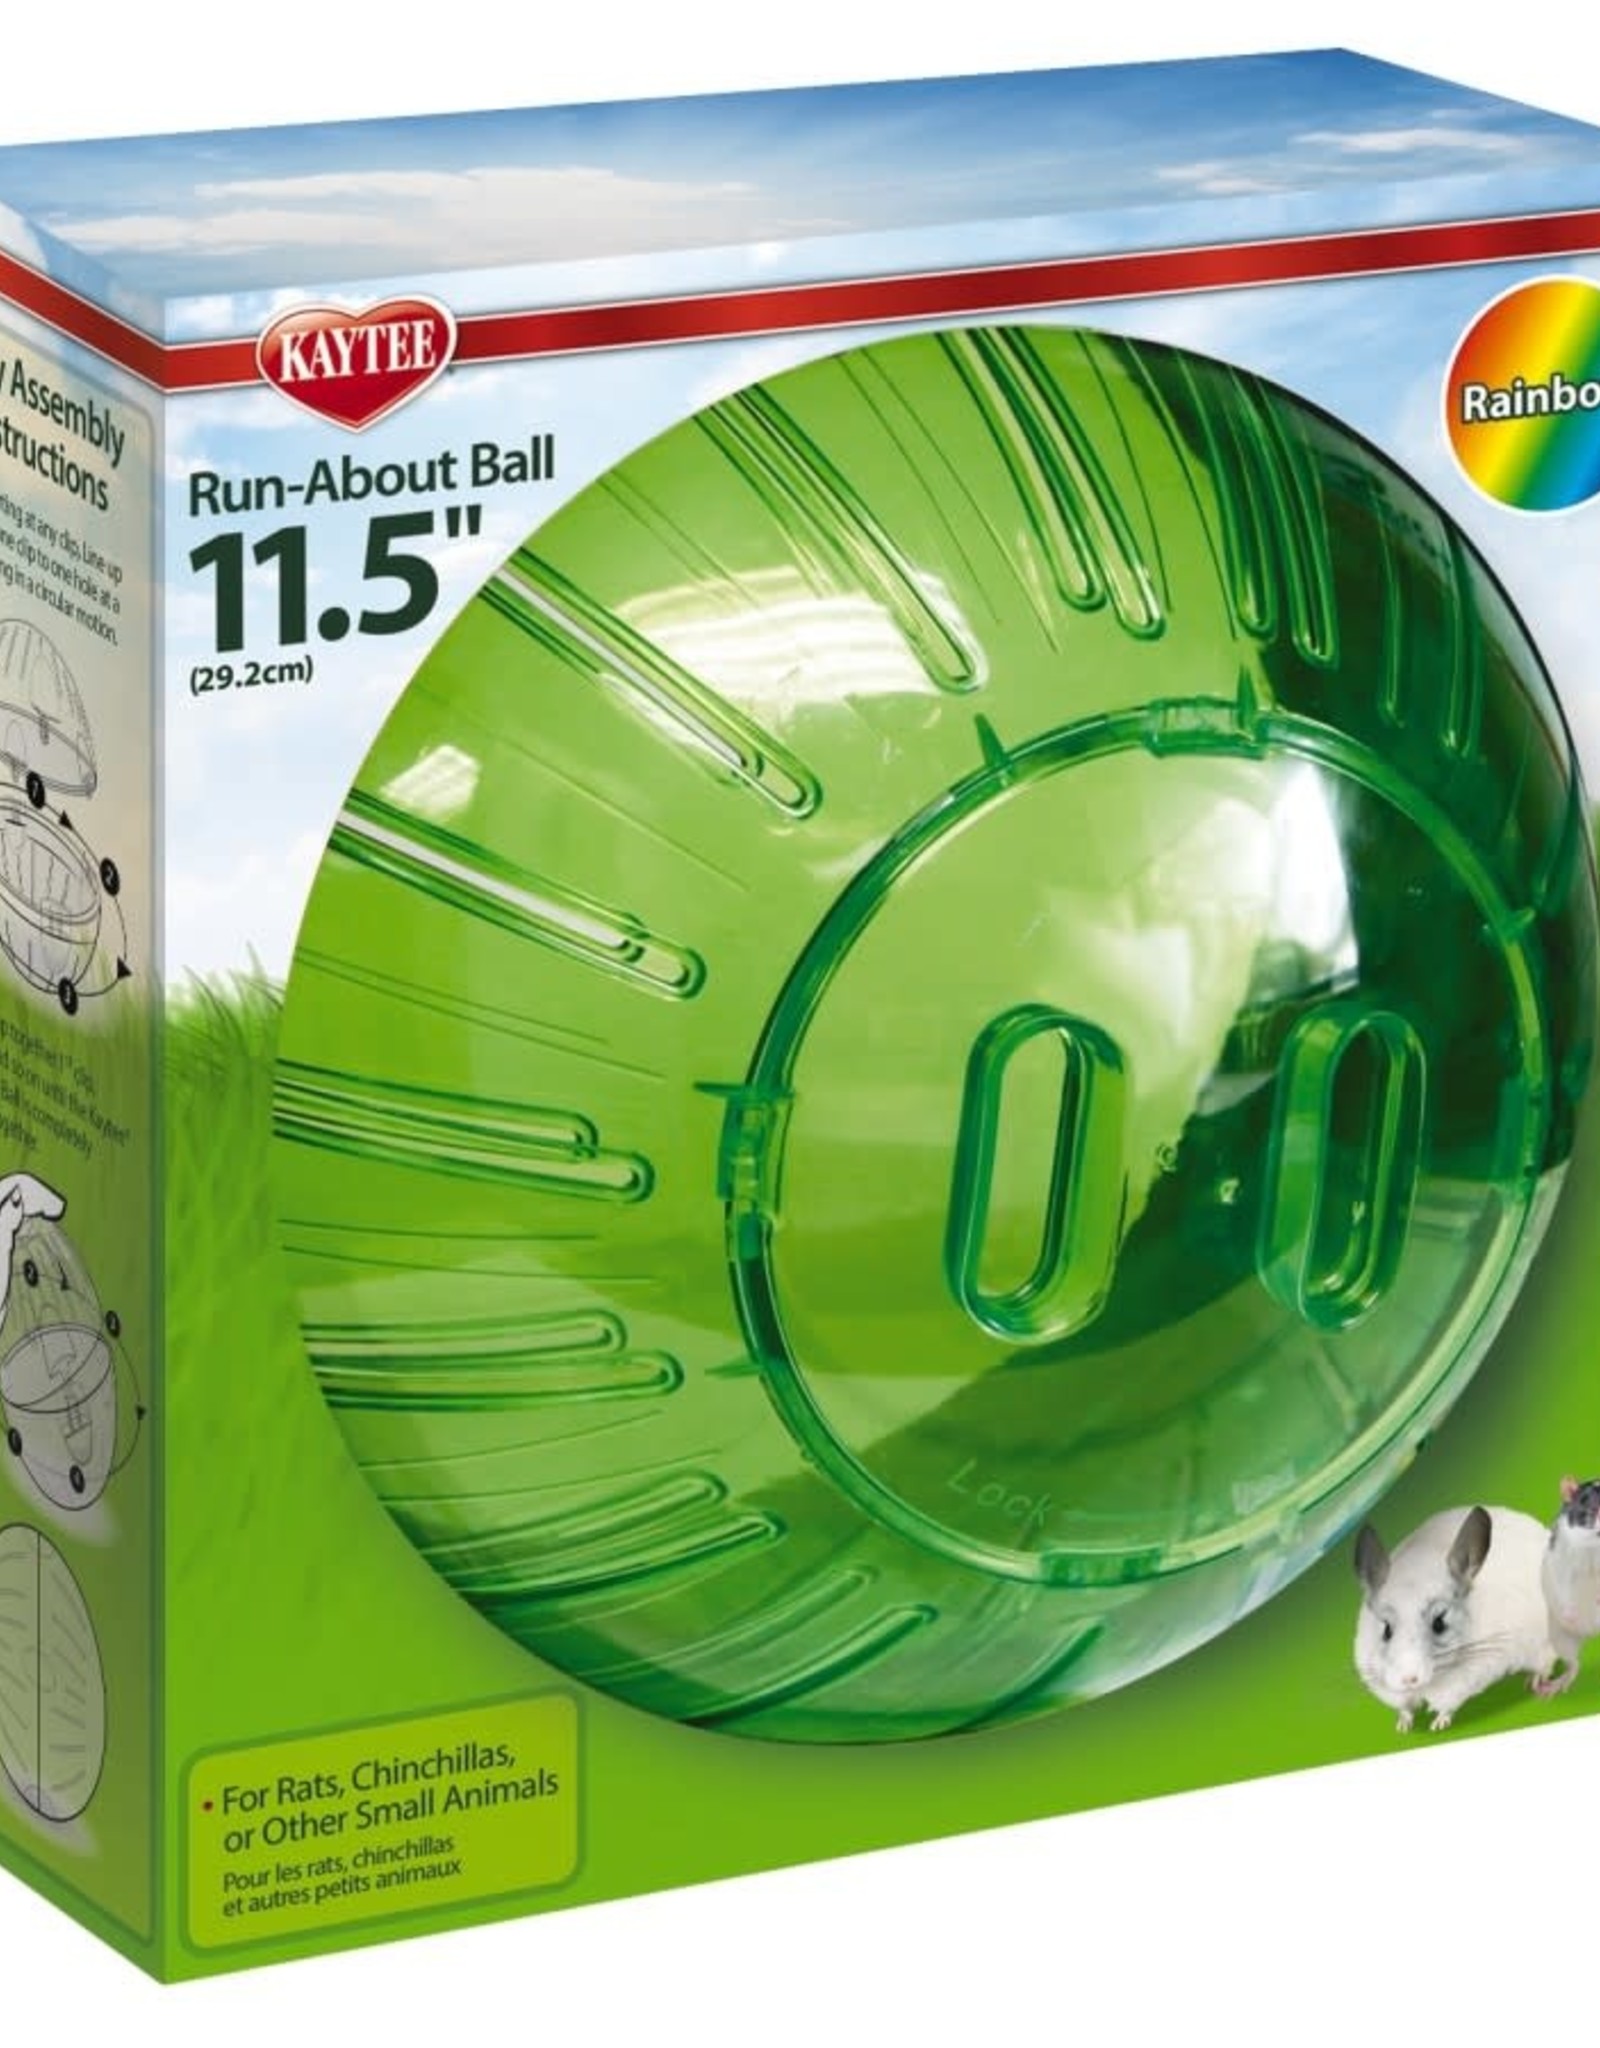 CENTRAL - KAYTEE PRODUCTS SUPER PET- RUN ABOUT BALL- 11.5 DIA- GIANT- RAINBOW